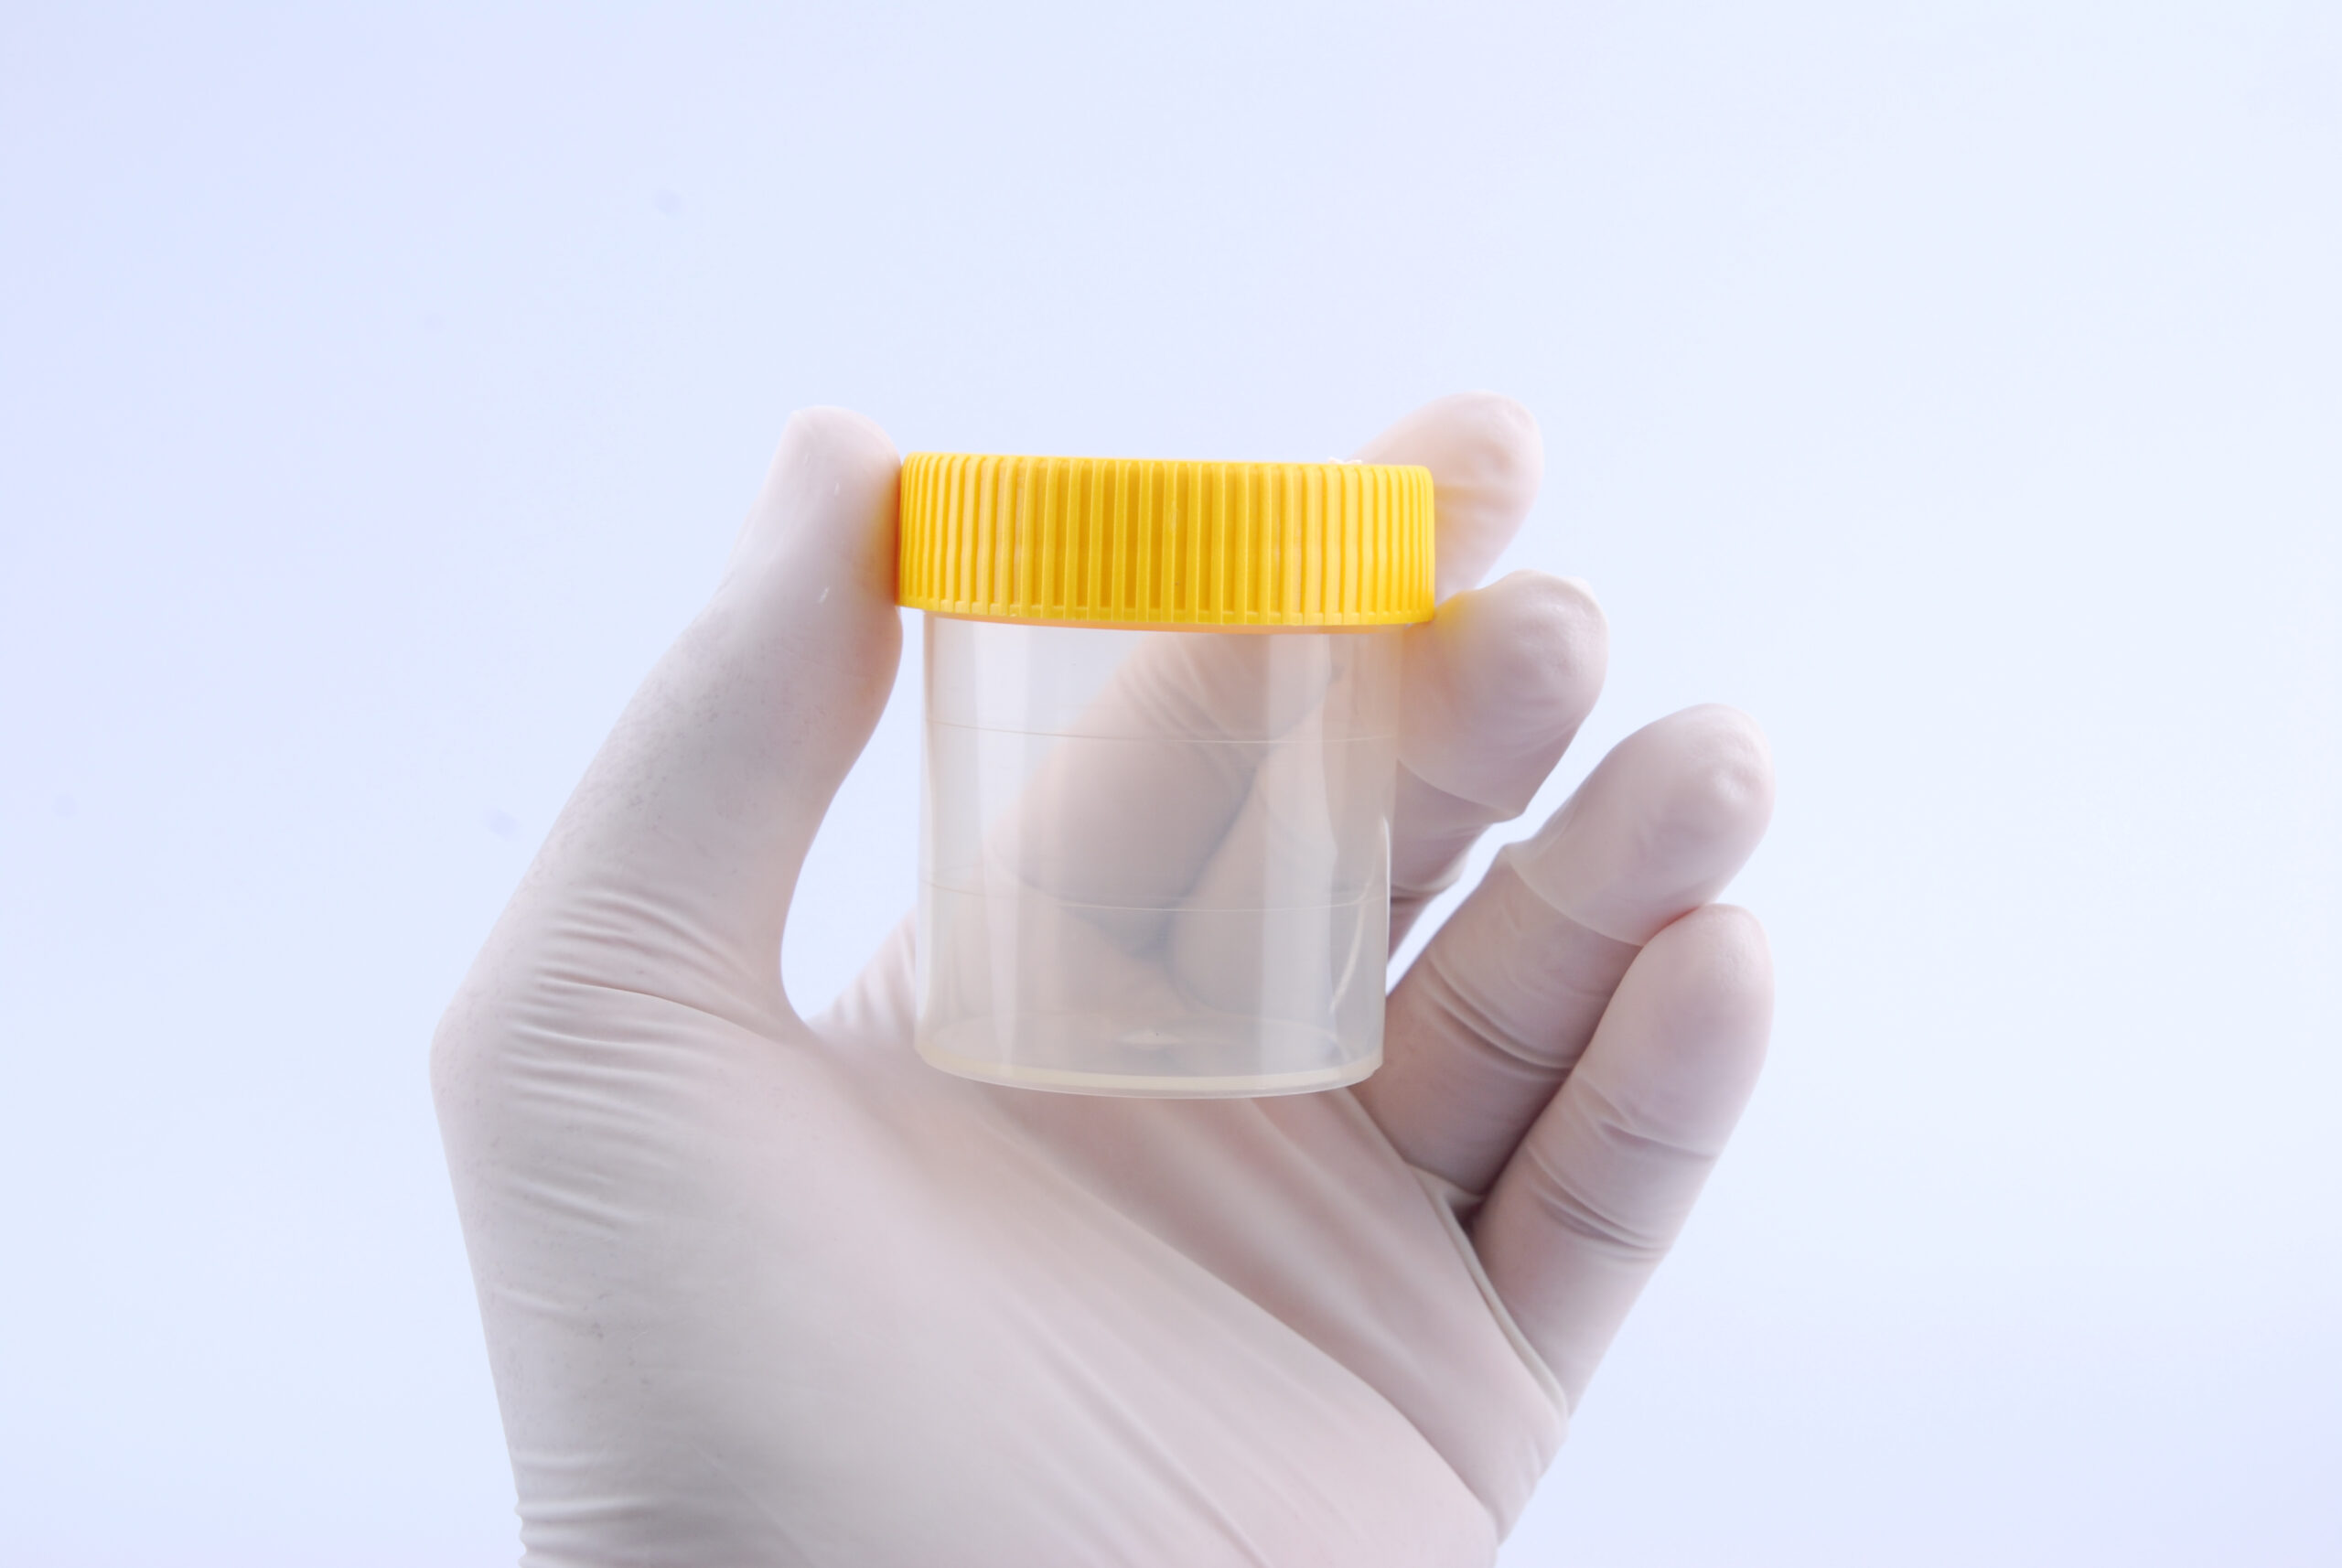 A gloved hand holding a drug test urine sample container